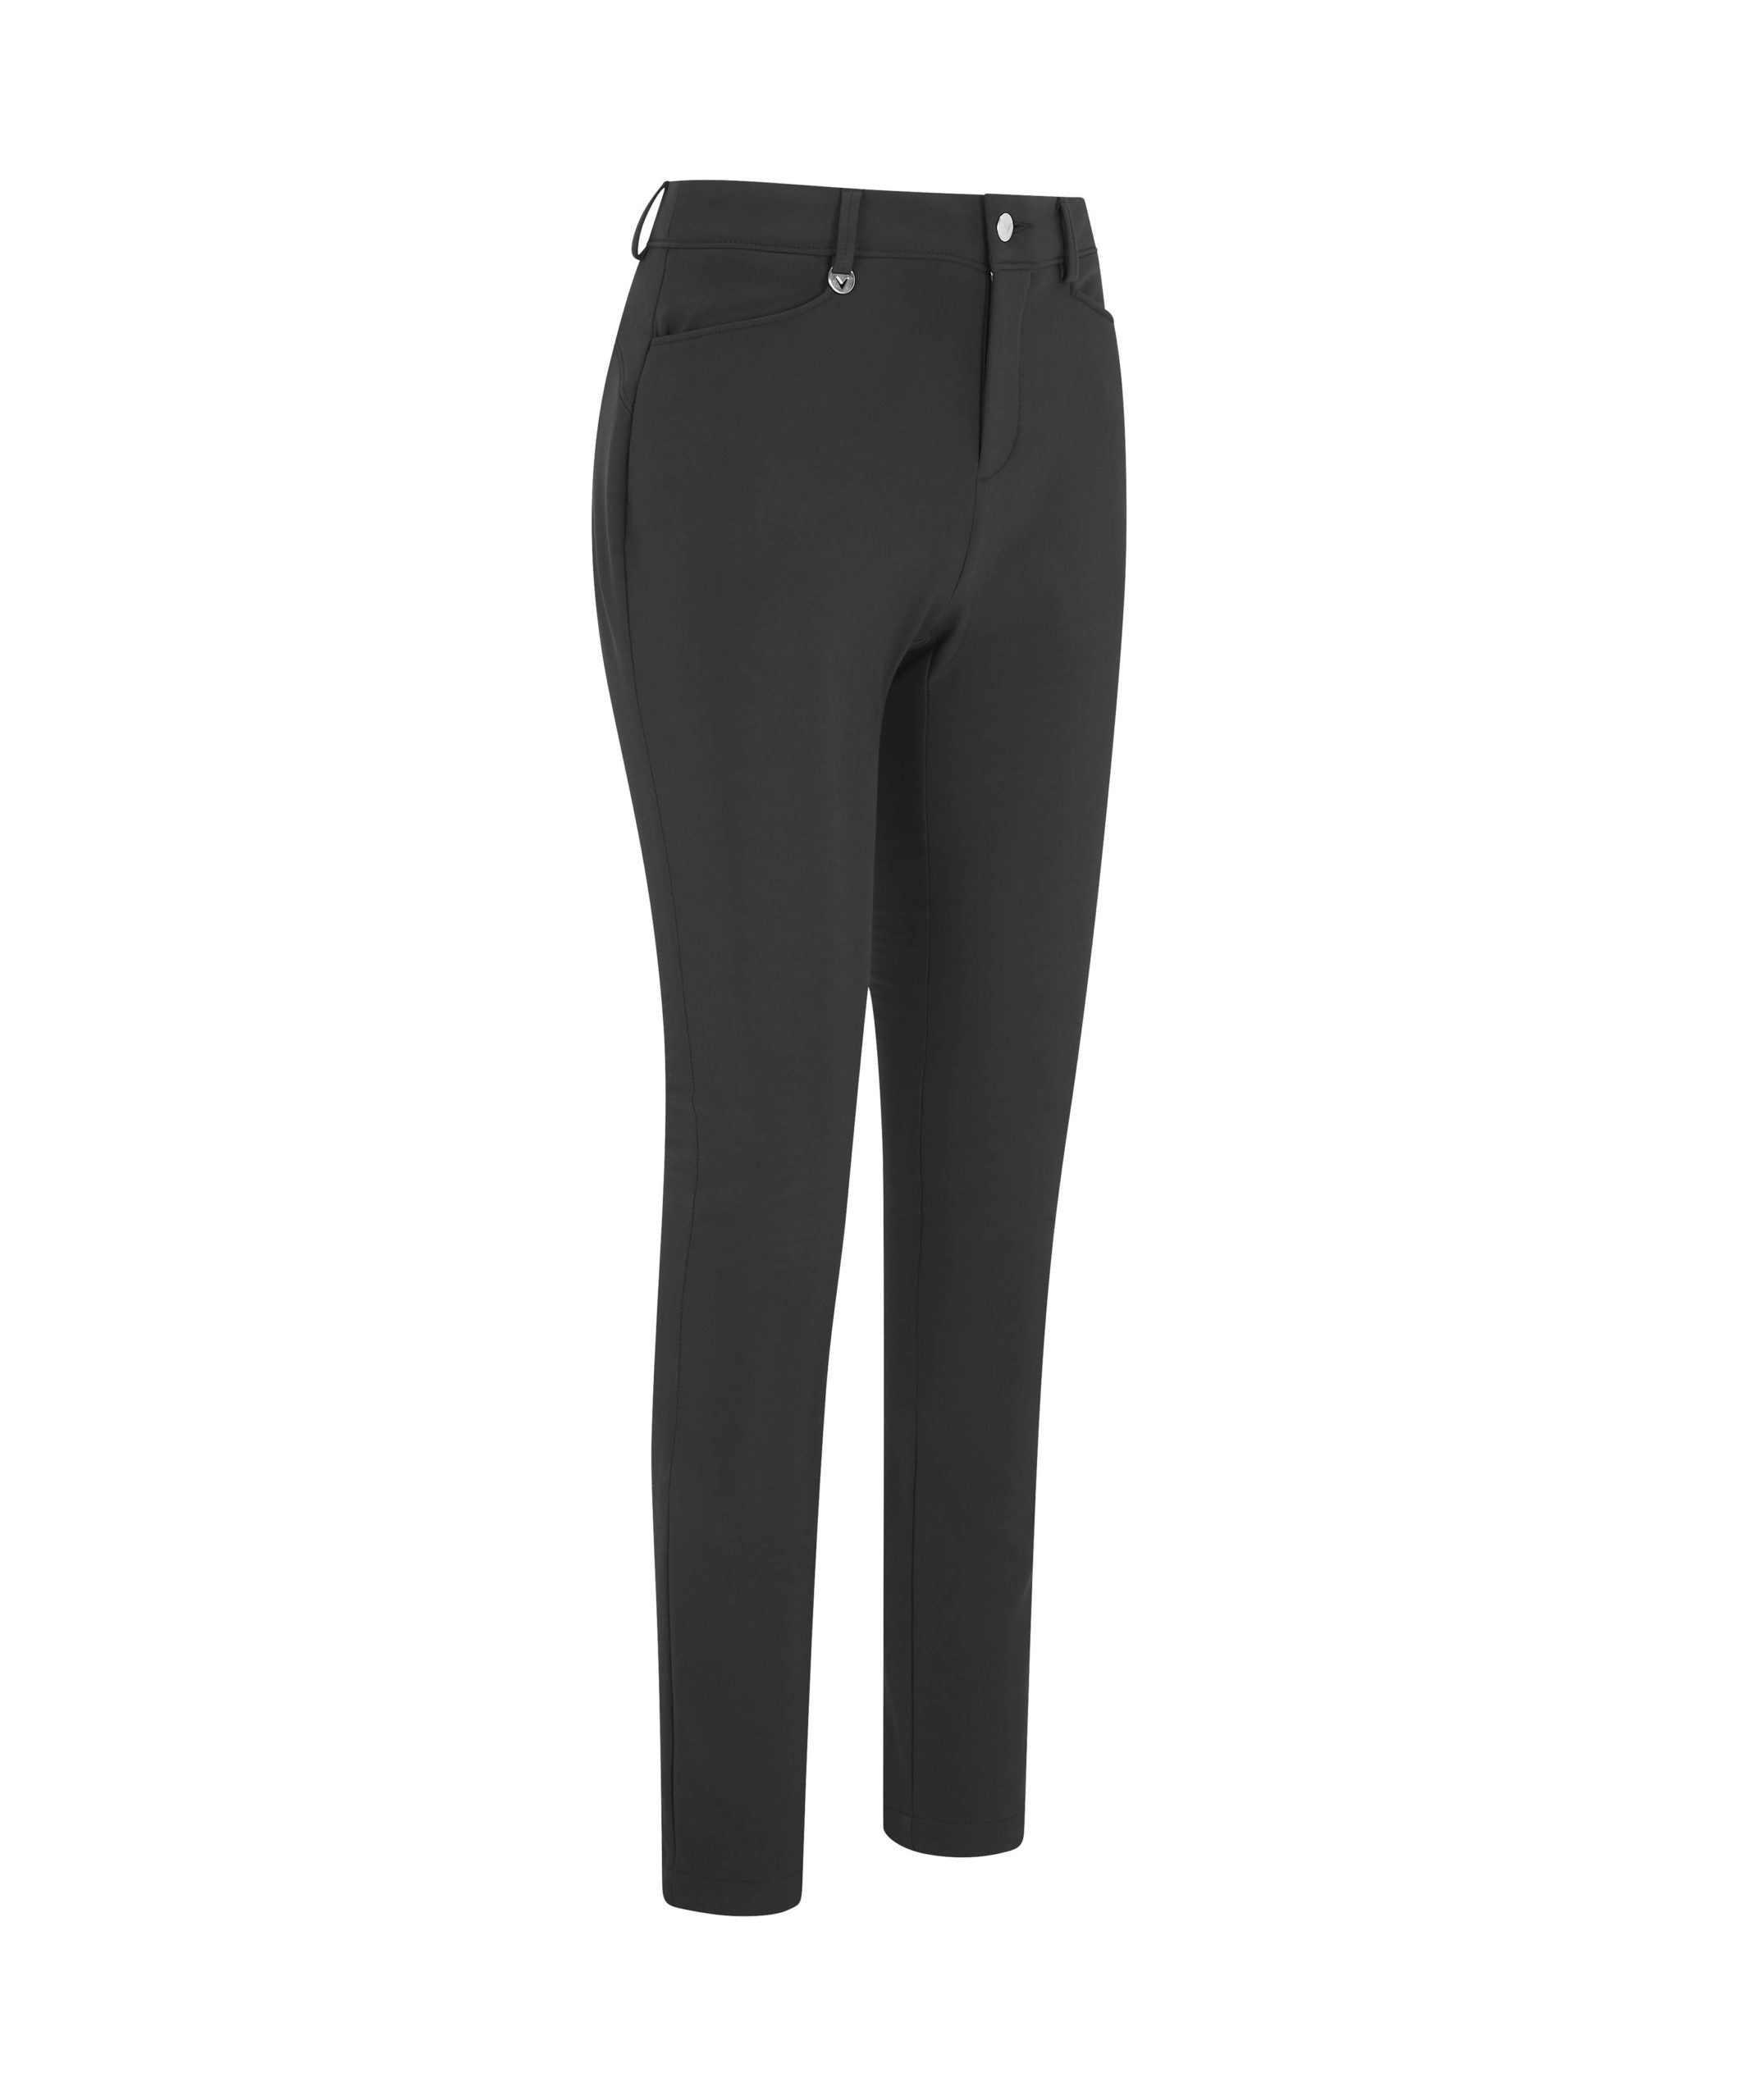 View Thermal Trousers In Caviar Caviar 18 29 information